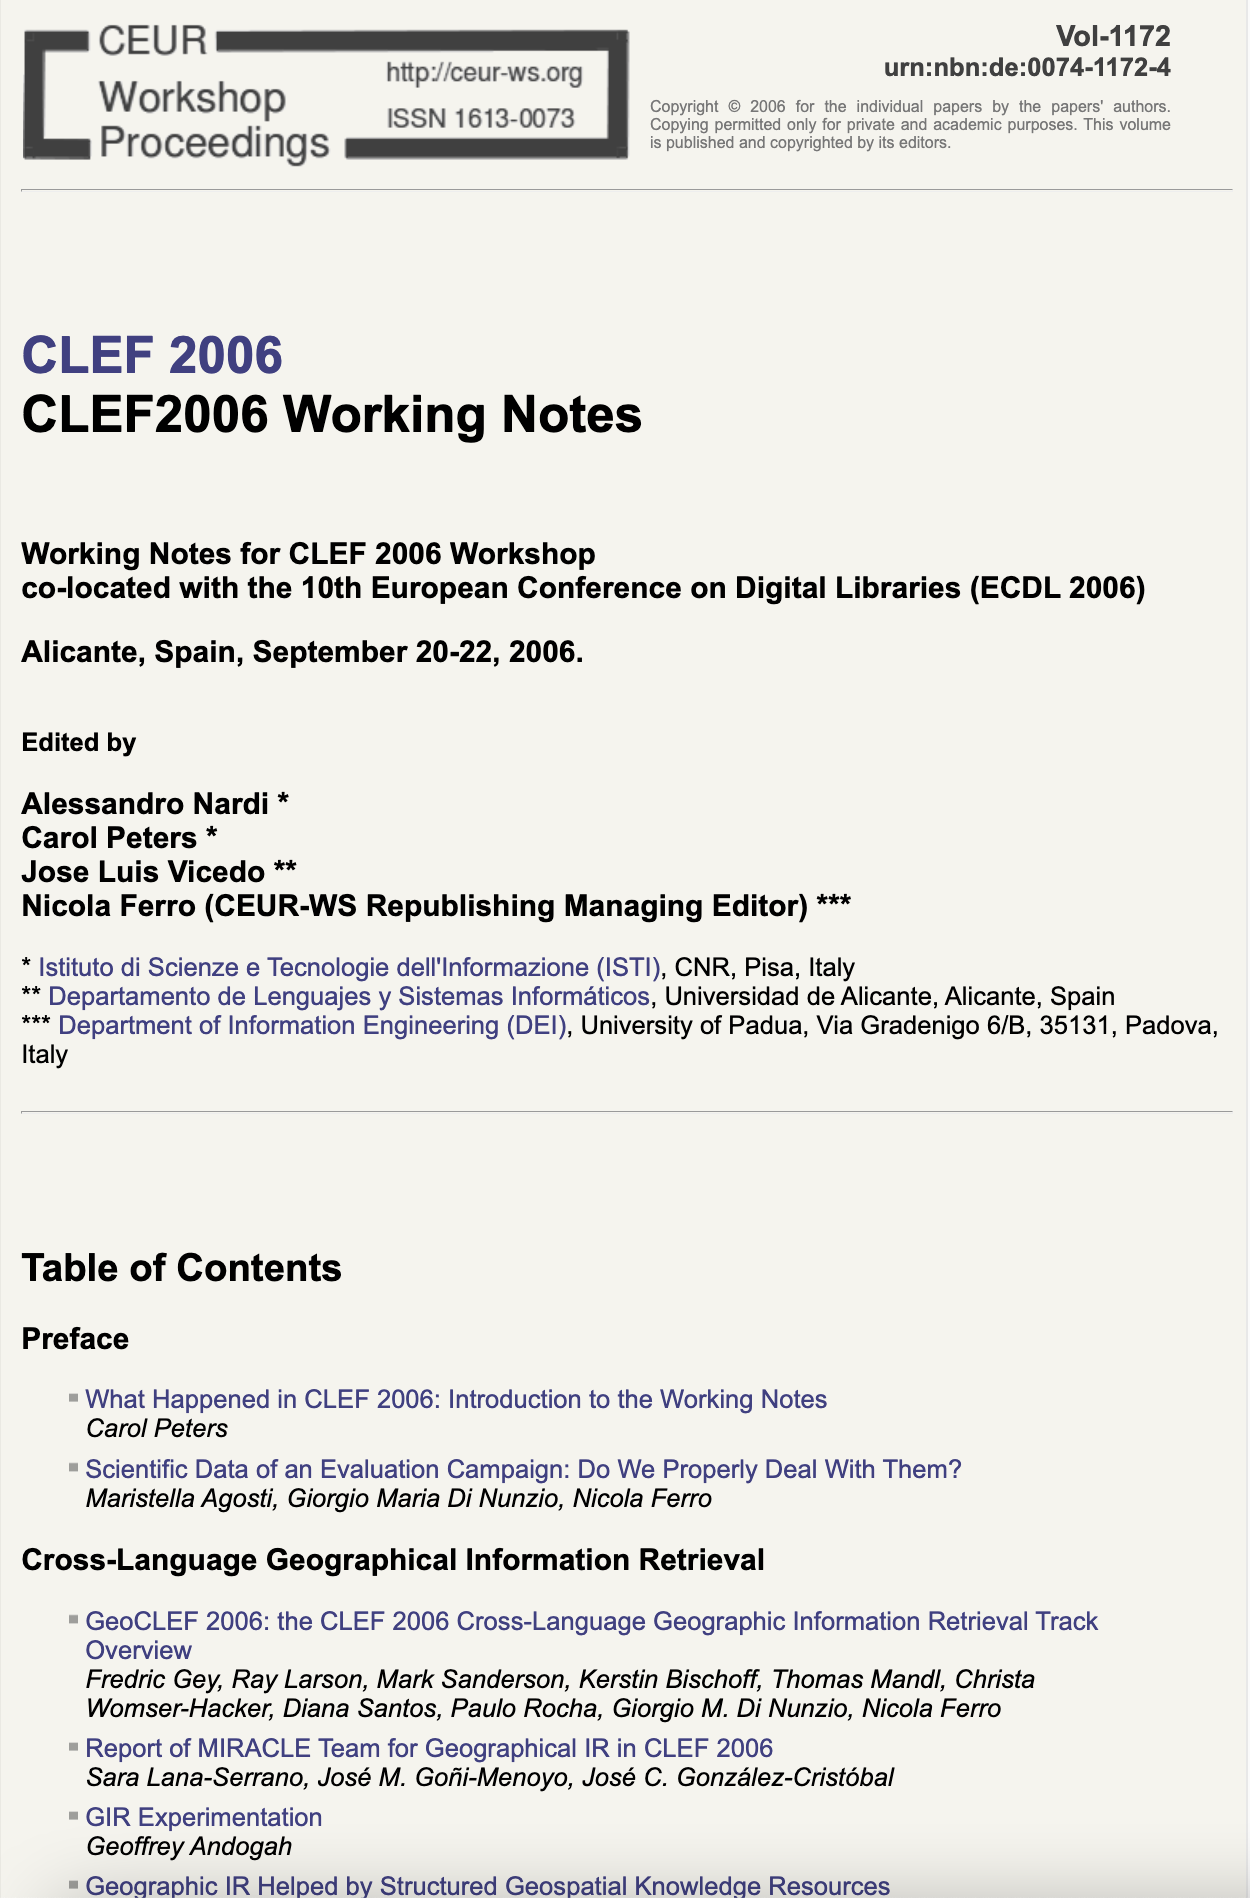 CLEF 2006 CEUR-WS Working Notes page